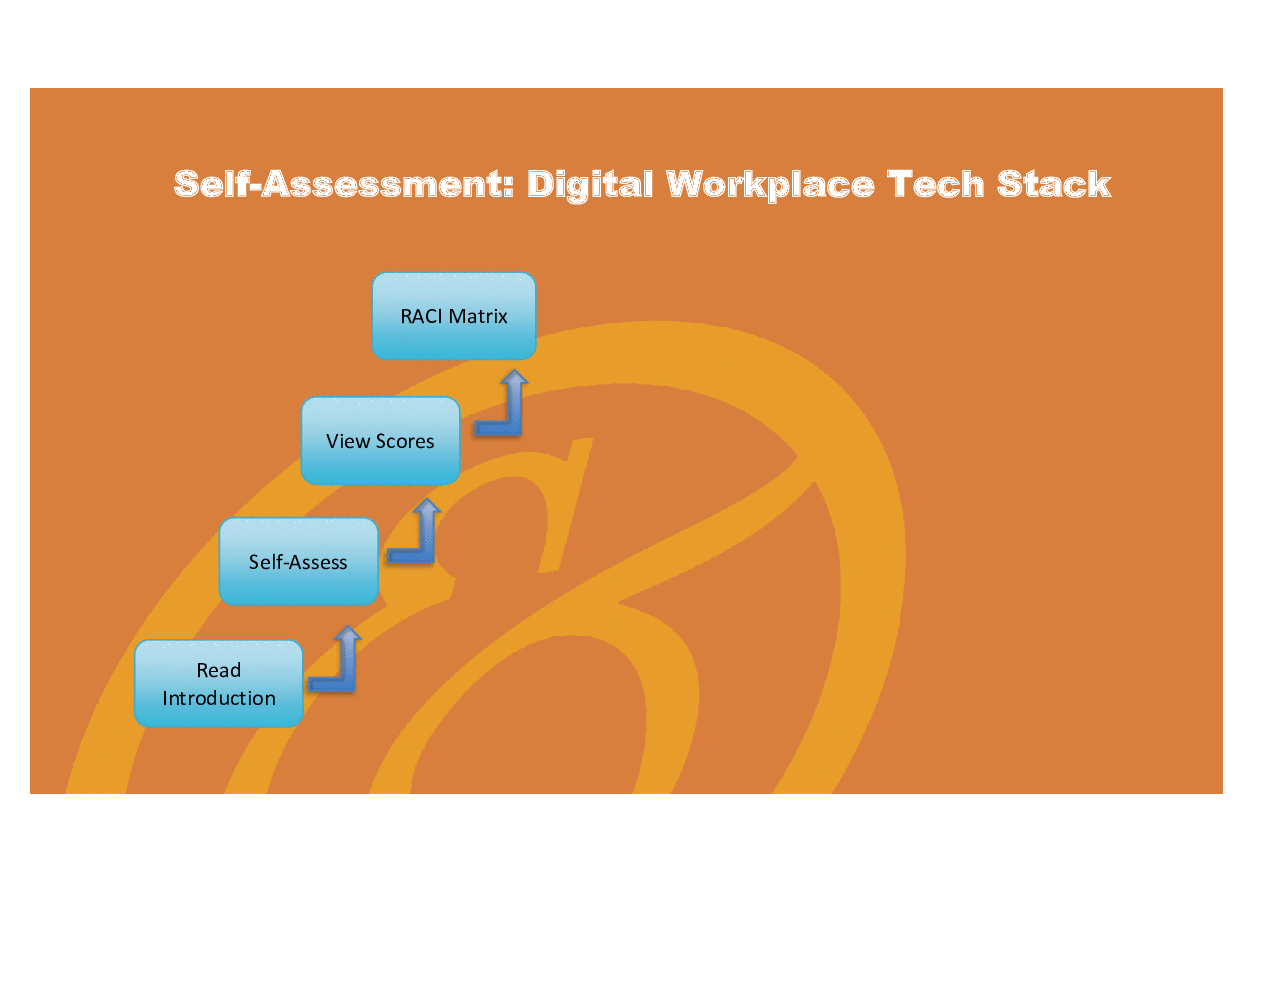 Digital Workplace Tech Stack - Implementation Toolkit